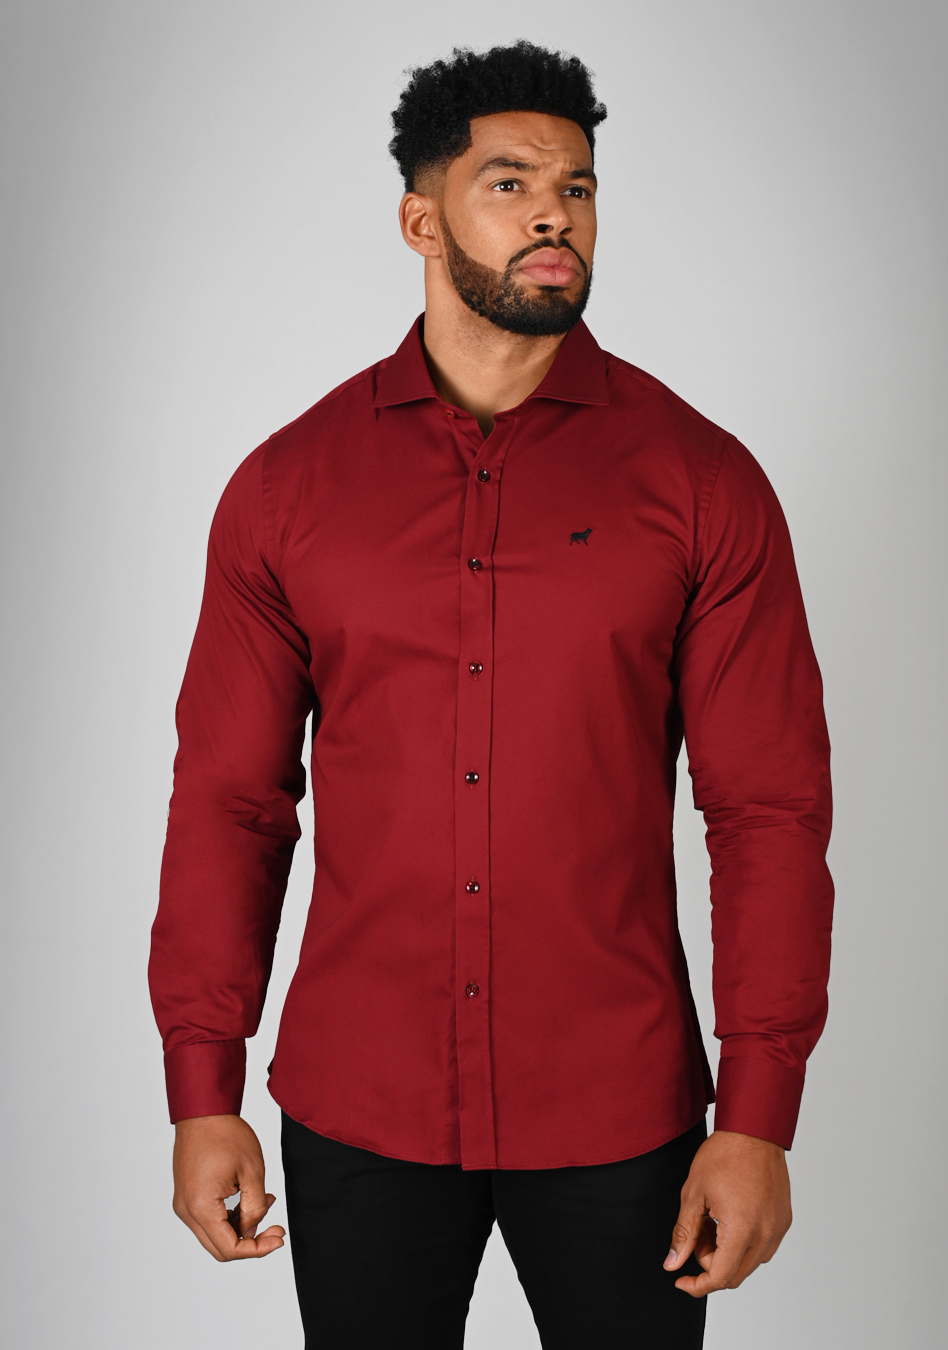 Red muscle fit shirt on an athletically built model, showcasing the athletic fit design that enhances physique, with stretch fabric for comfort and mobility